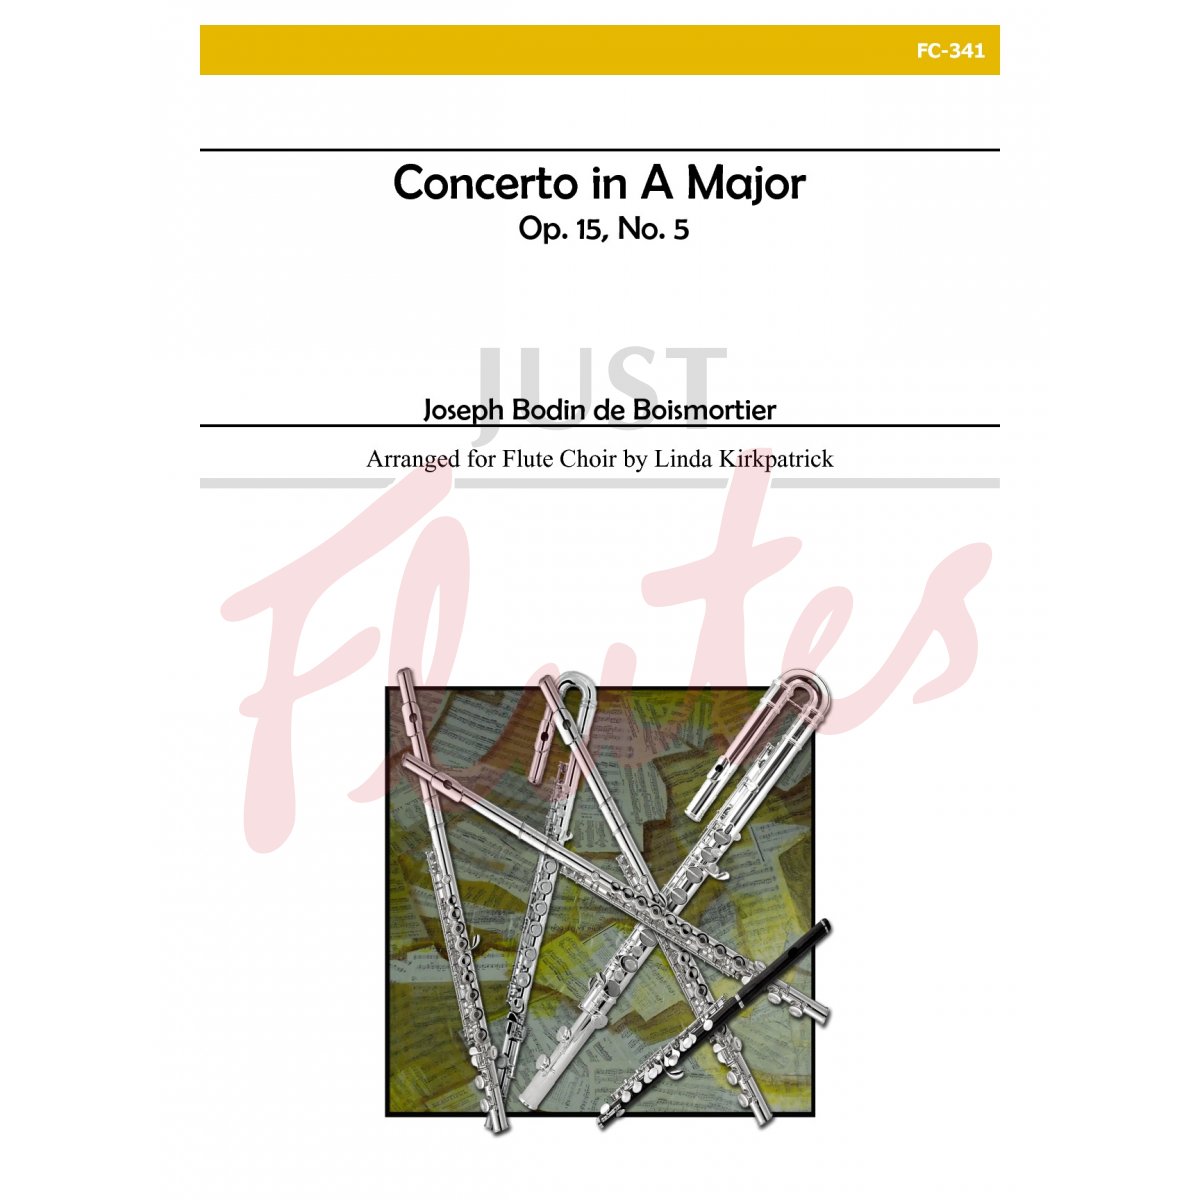 Concerto in A Major for Flute Choir